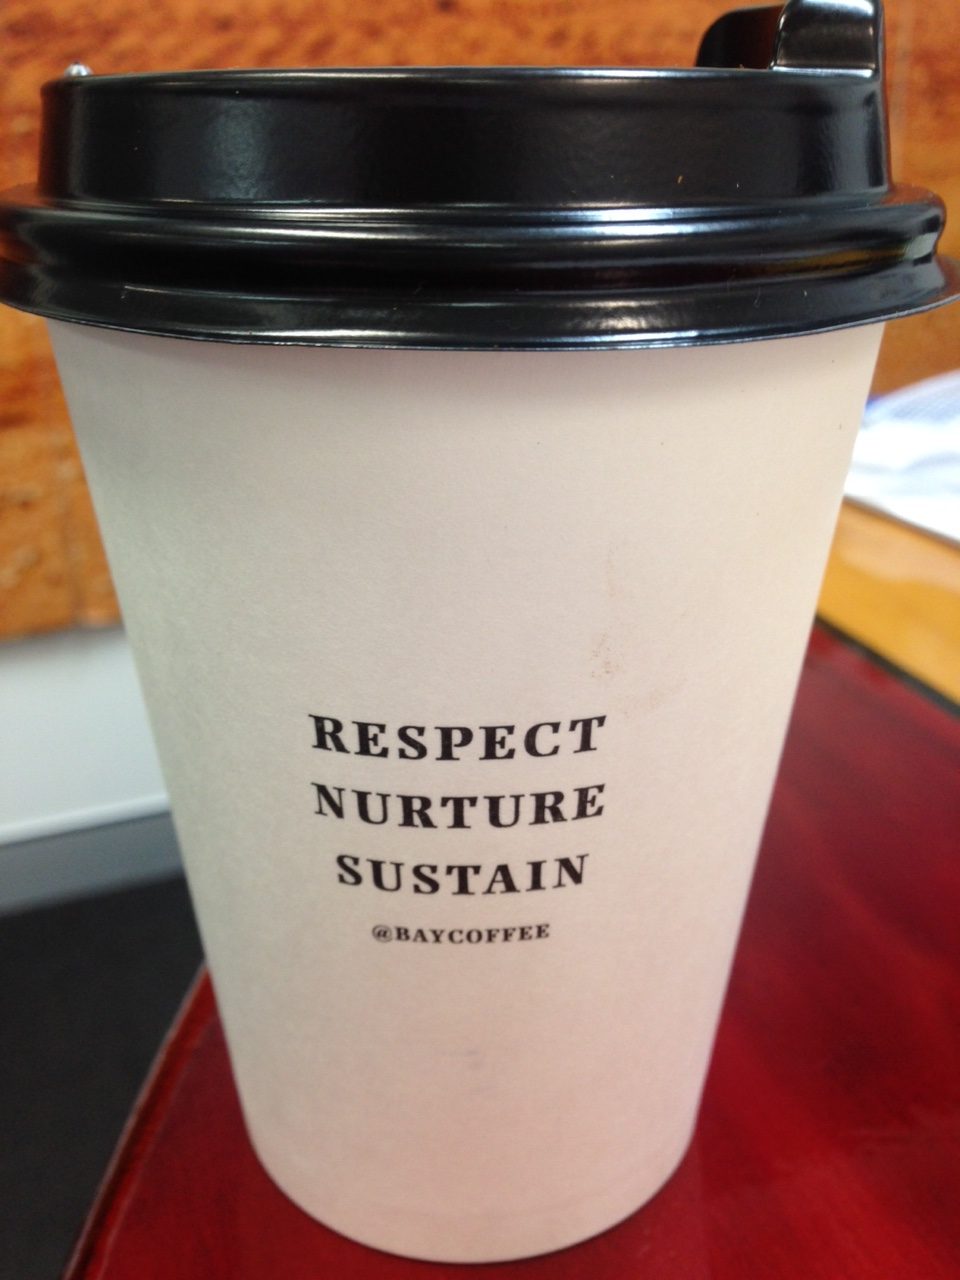 Inspiration from a coffee cup